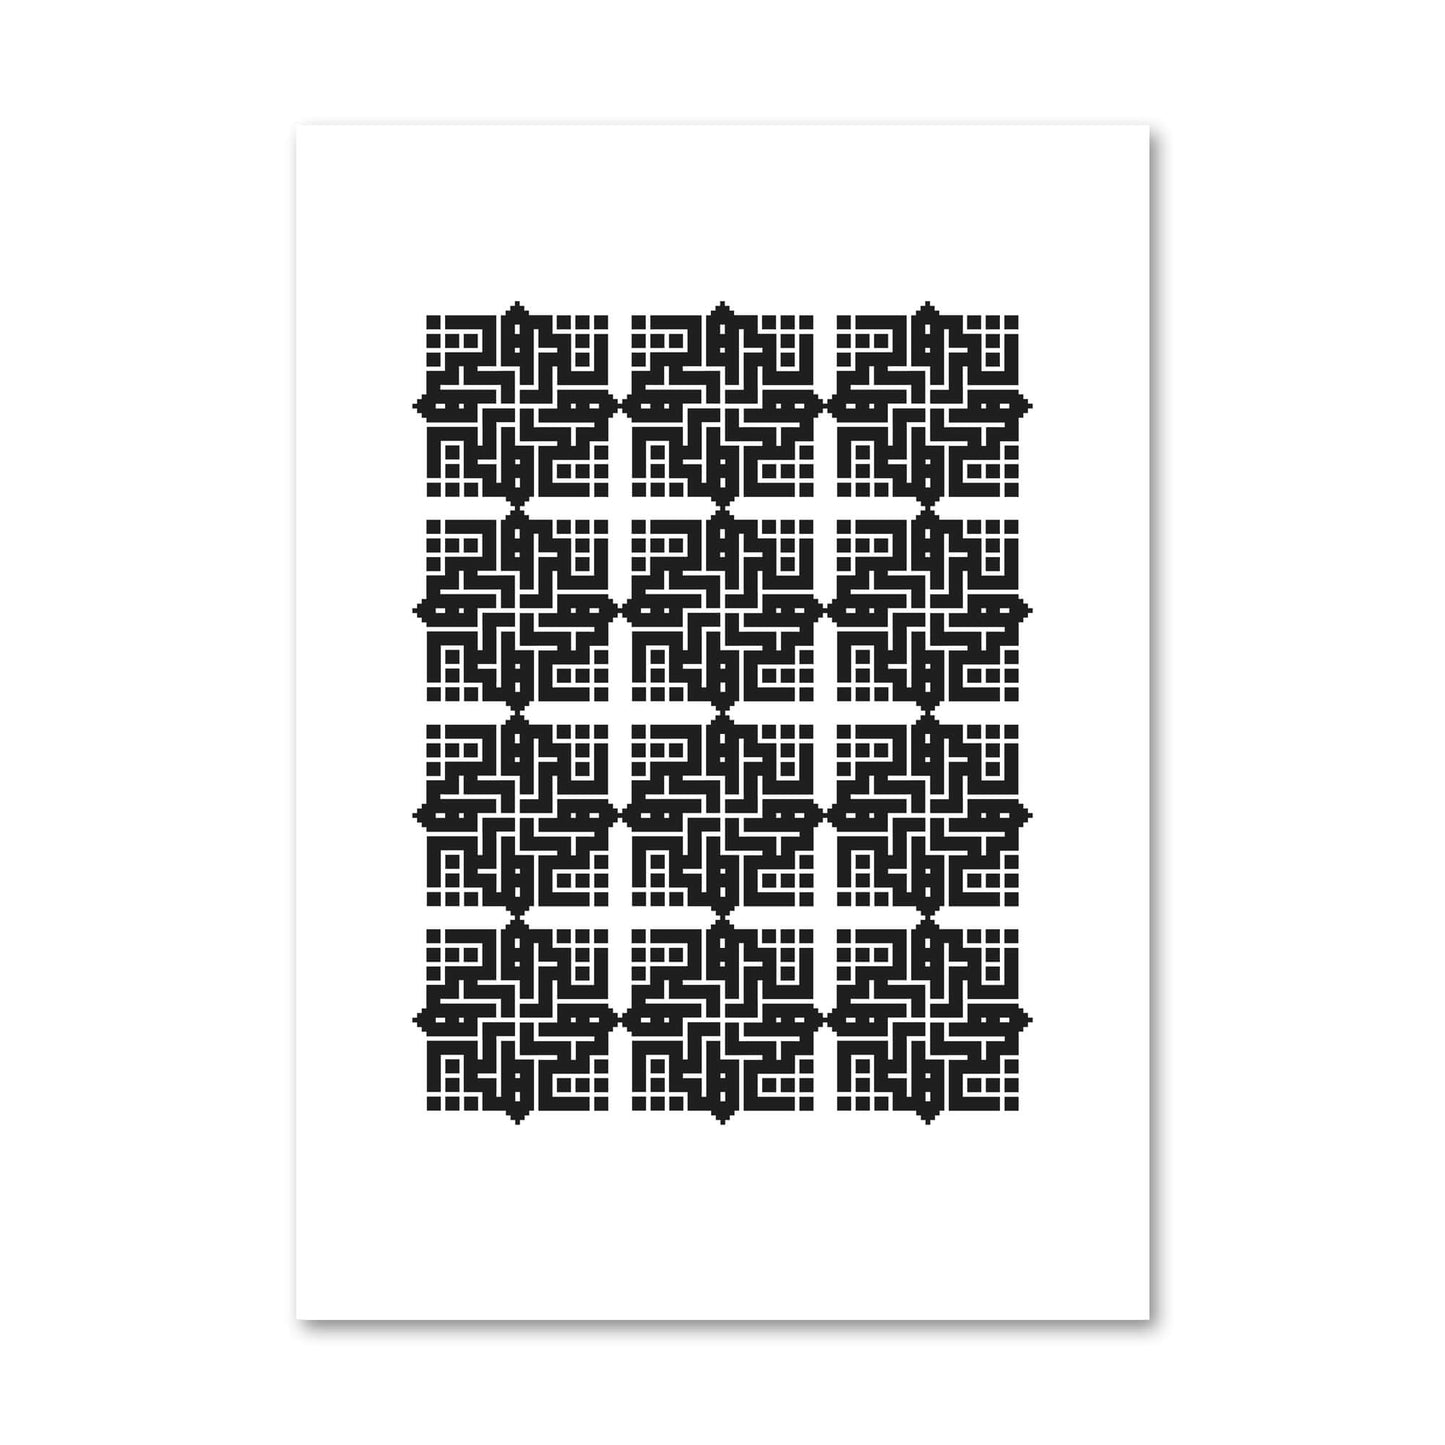 HICH-ENDER-HICH (Nothing at all) Print